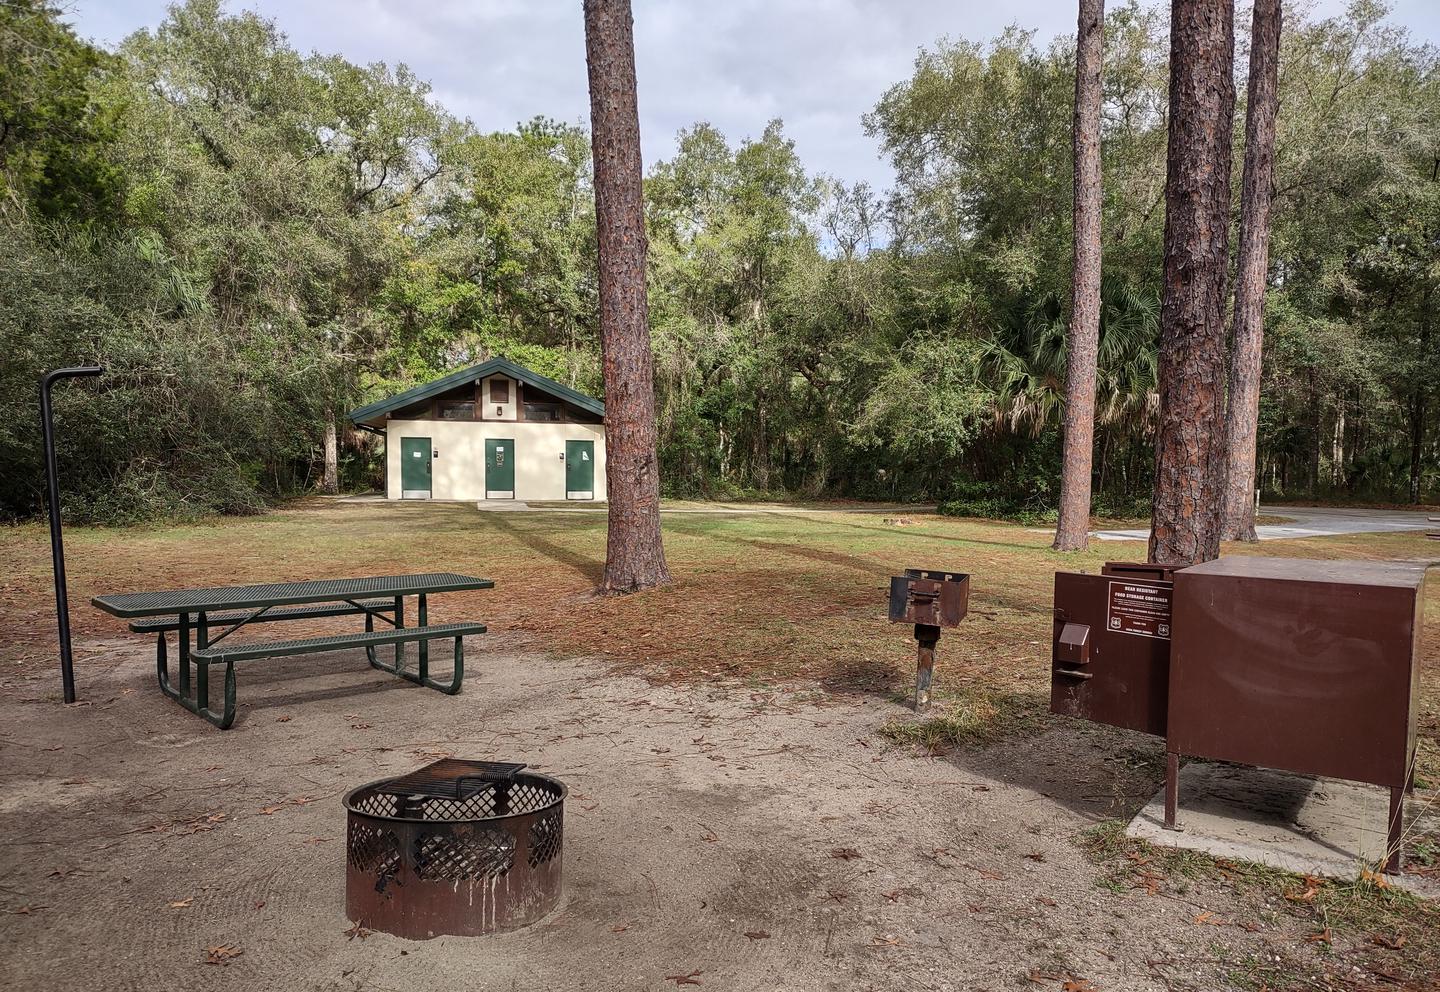 Another view of site 62Amenities: fire ring, picnic table, light pole, grill, bear-proof storage locker; near bathhouse 